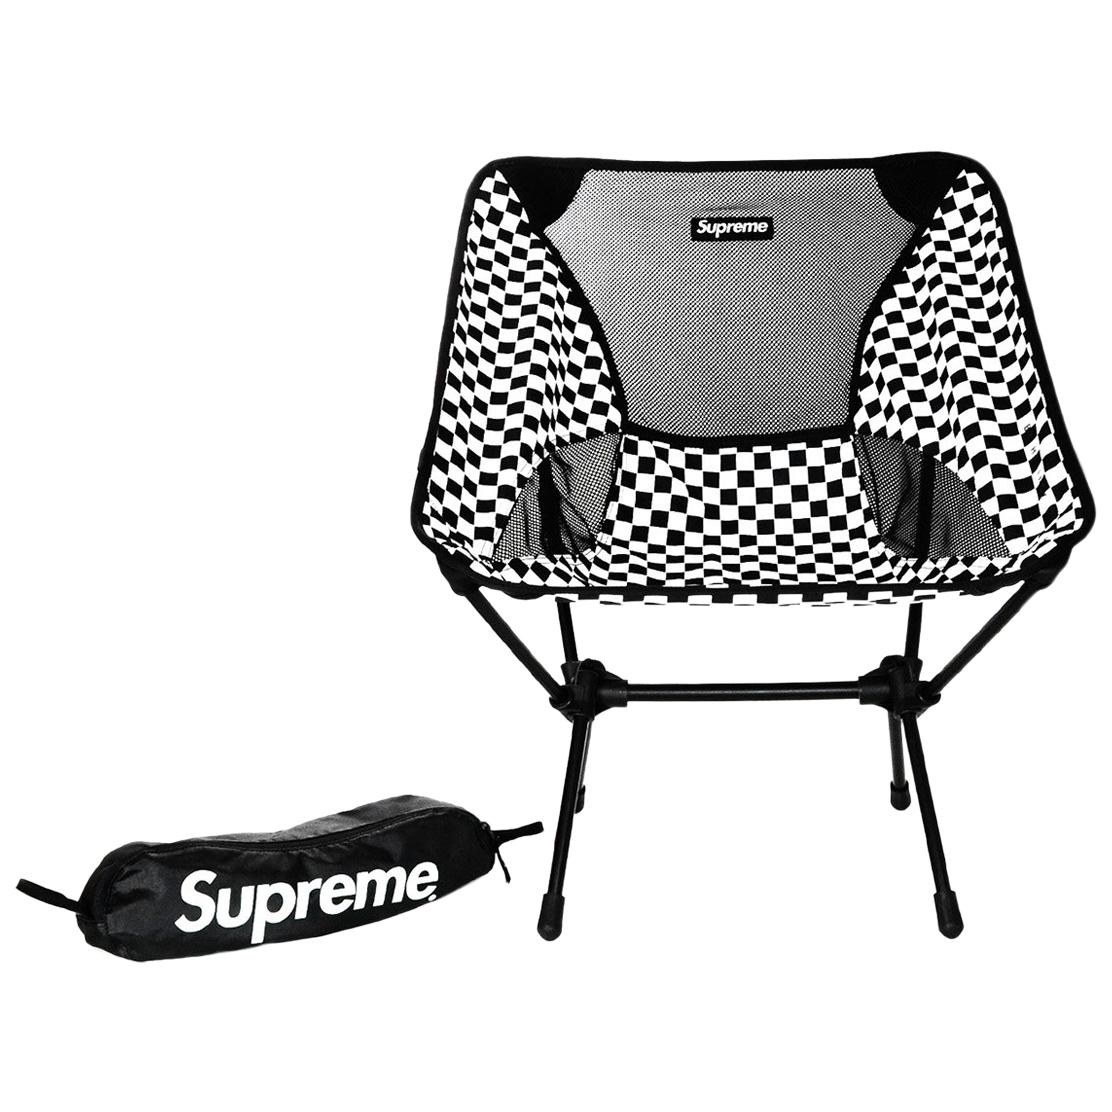 Supreme/Helinox table one/chair oneセット